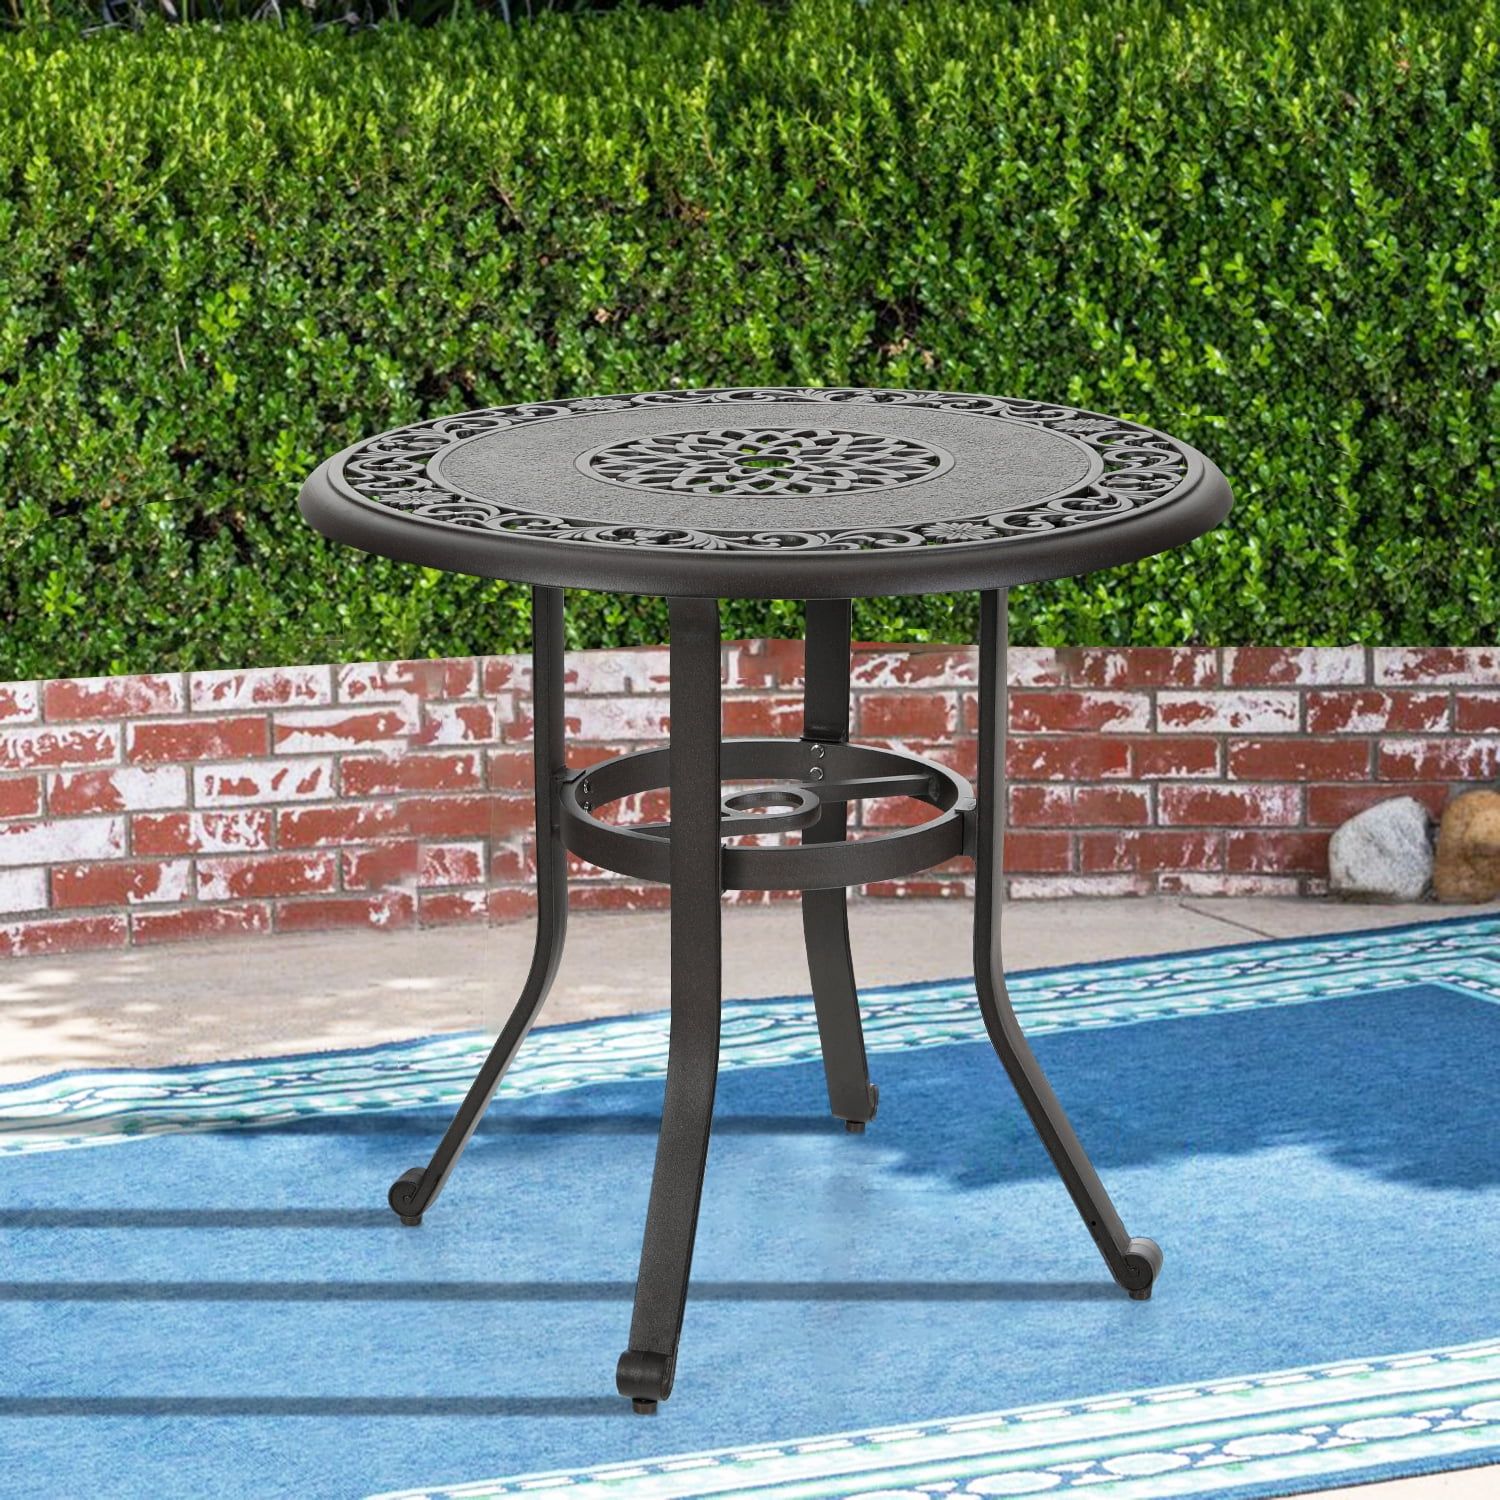 Mf Studio 32" Cast Aluminum Patio Outdoor Bistro Table, Round Dining With Regard To Outdoor Half Round Coffee Tables (Gallery 4 of 20)